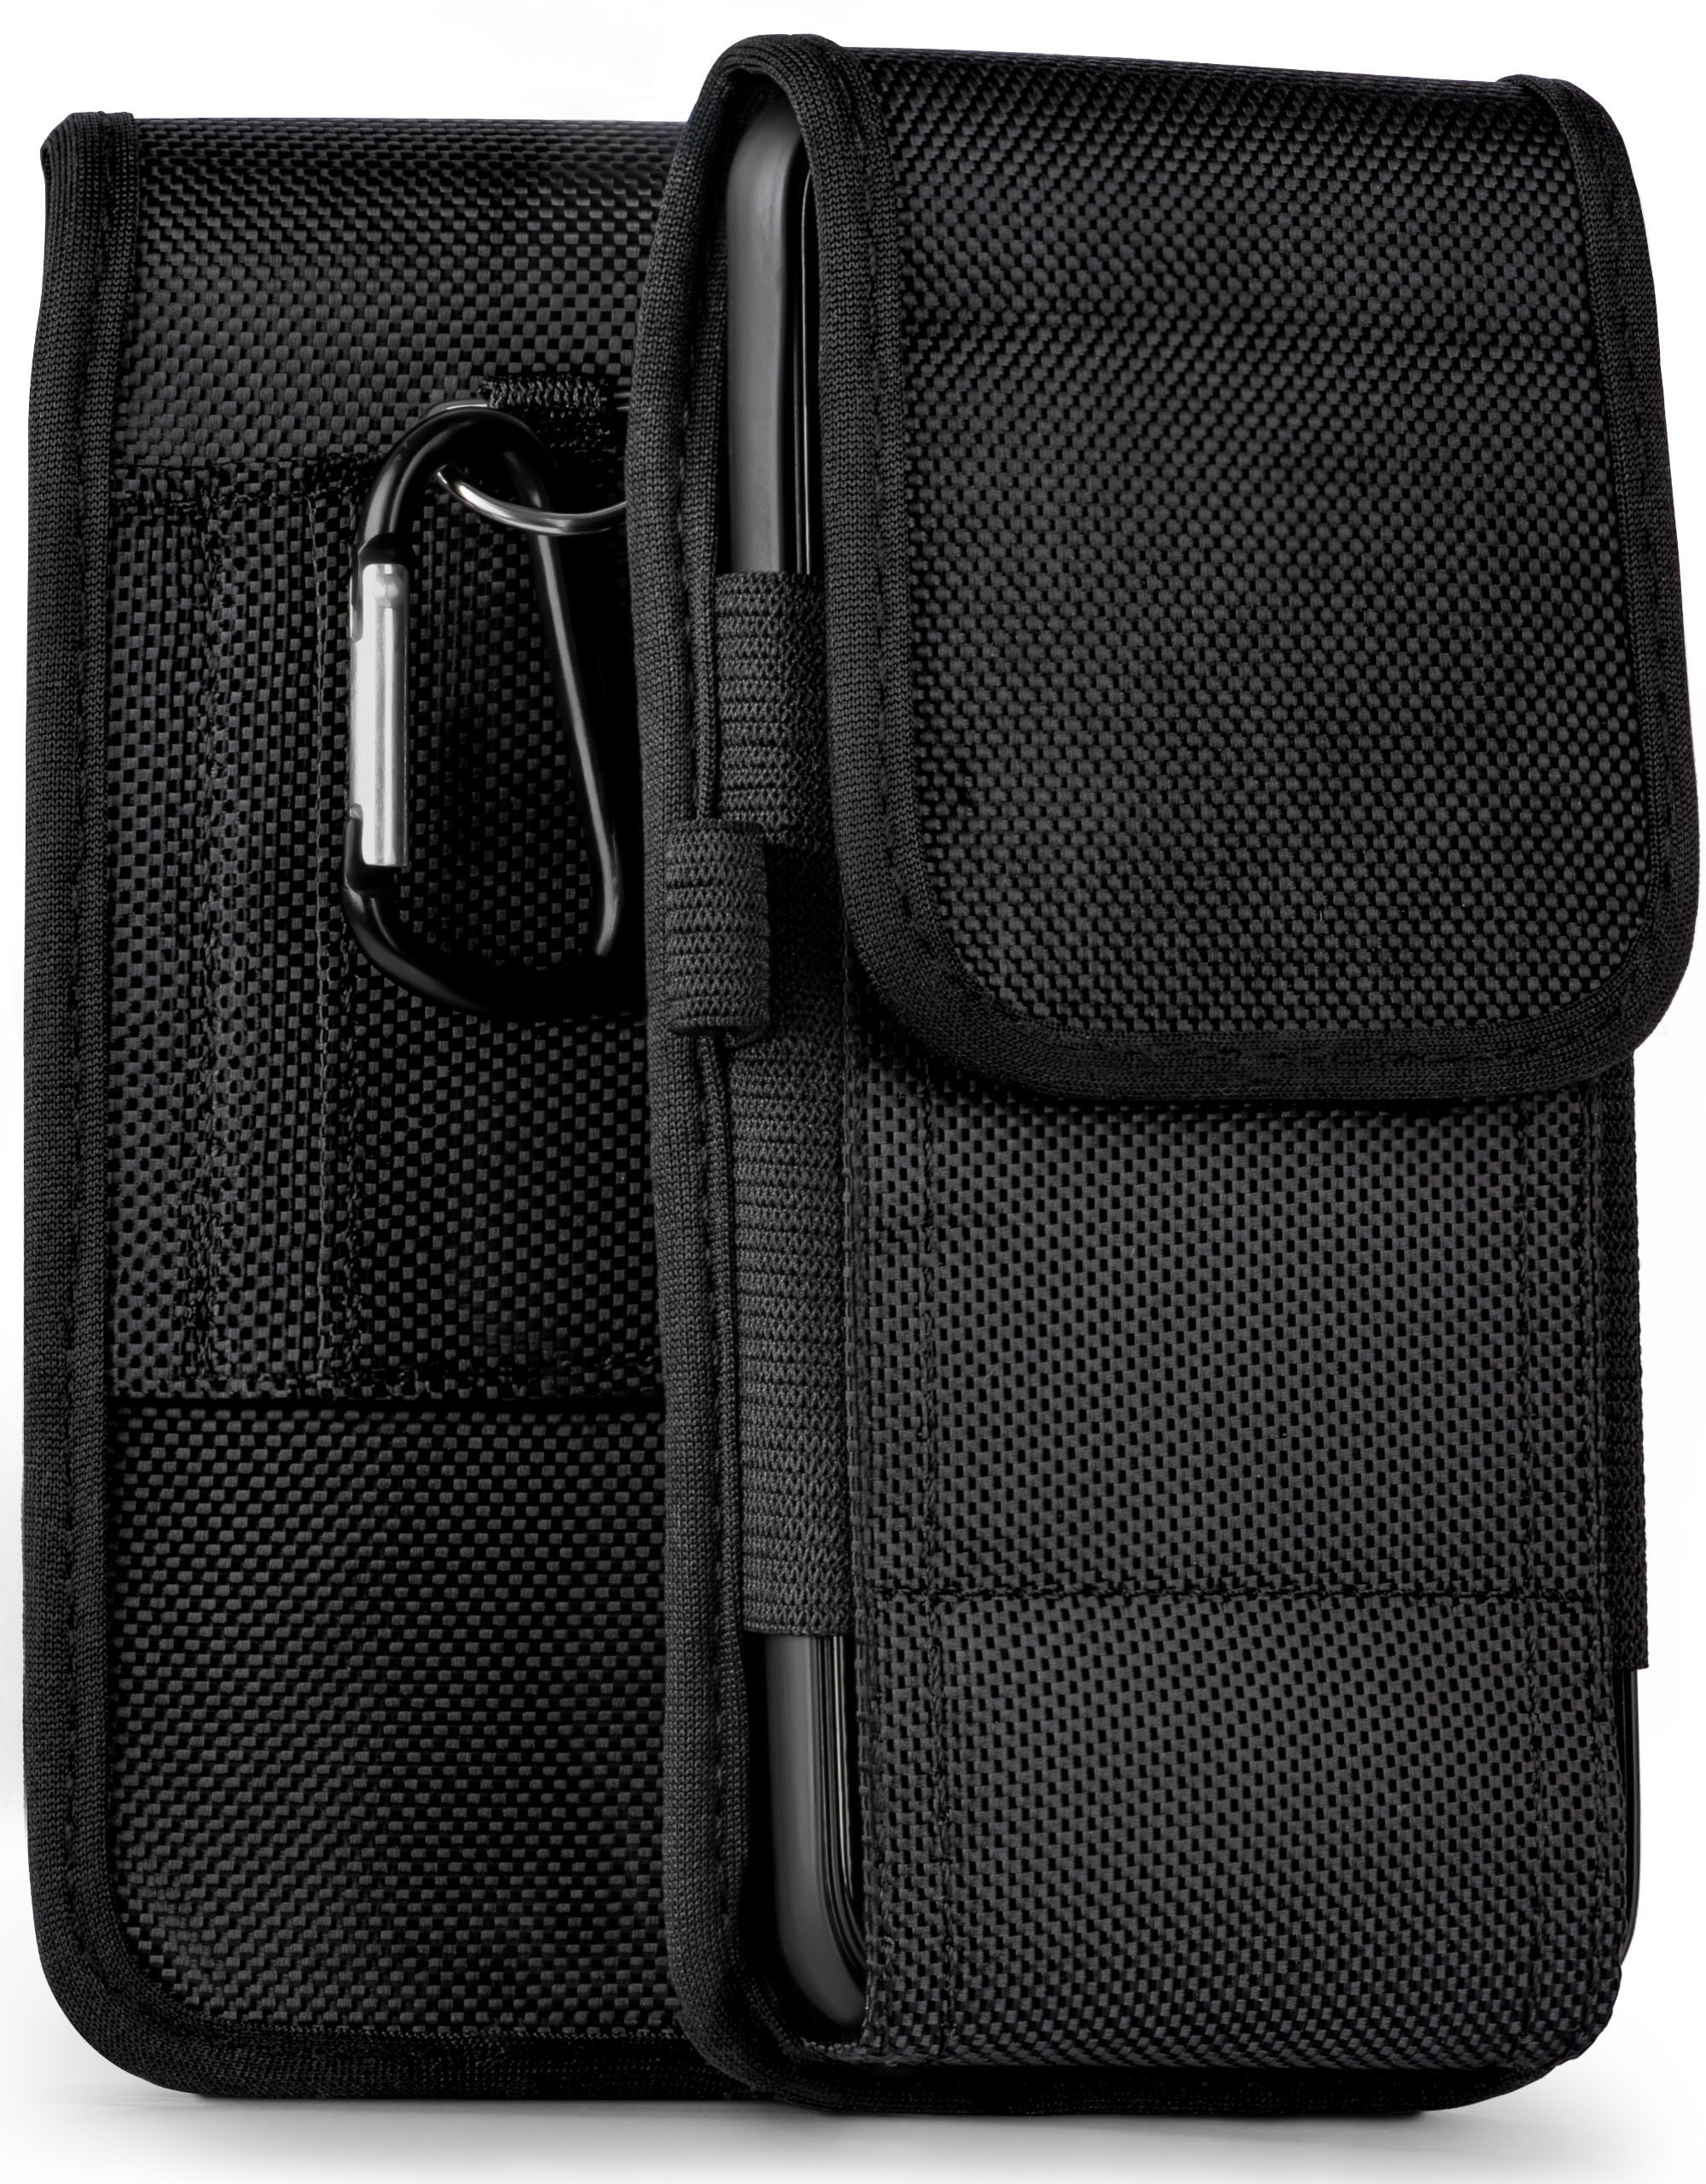 Agility One Plus, Holster, HTC, MOEX Trail M9 Case,